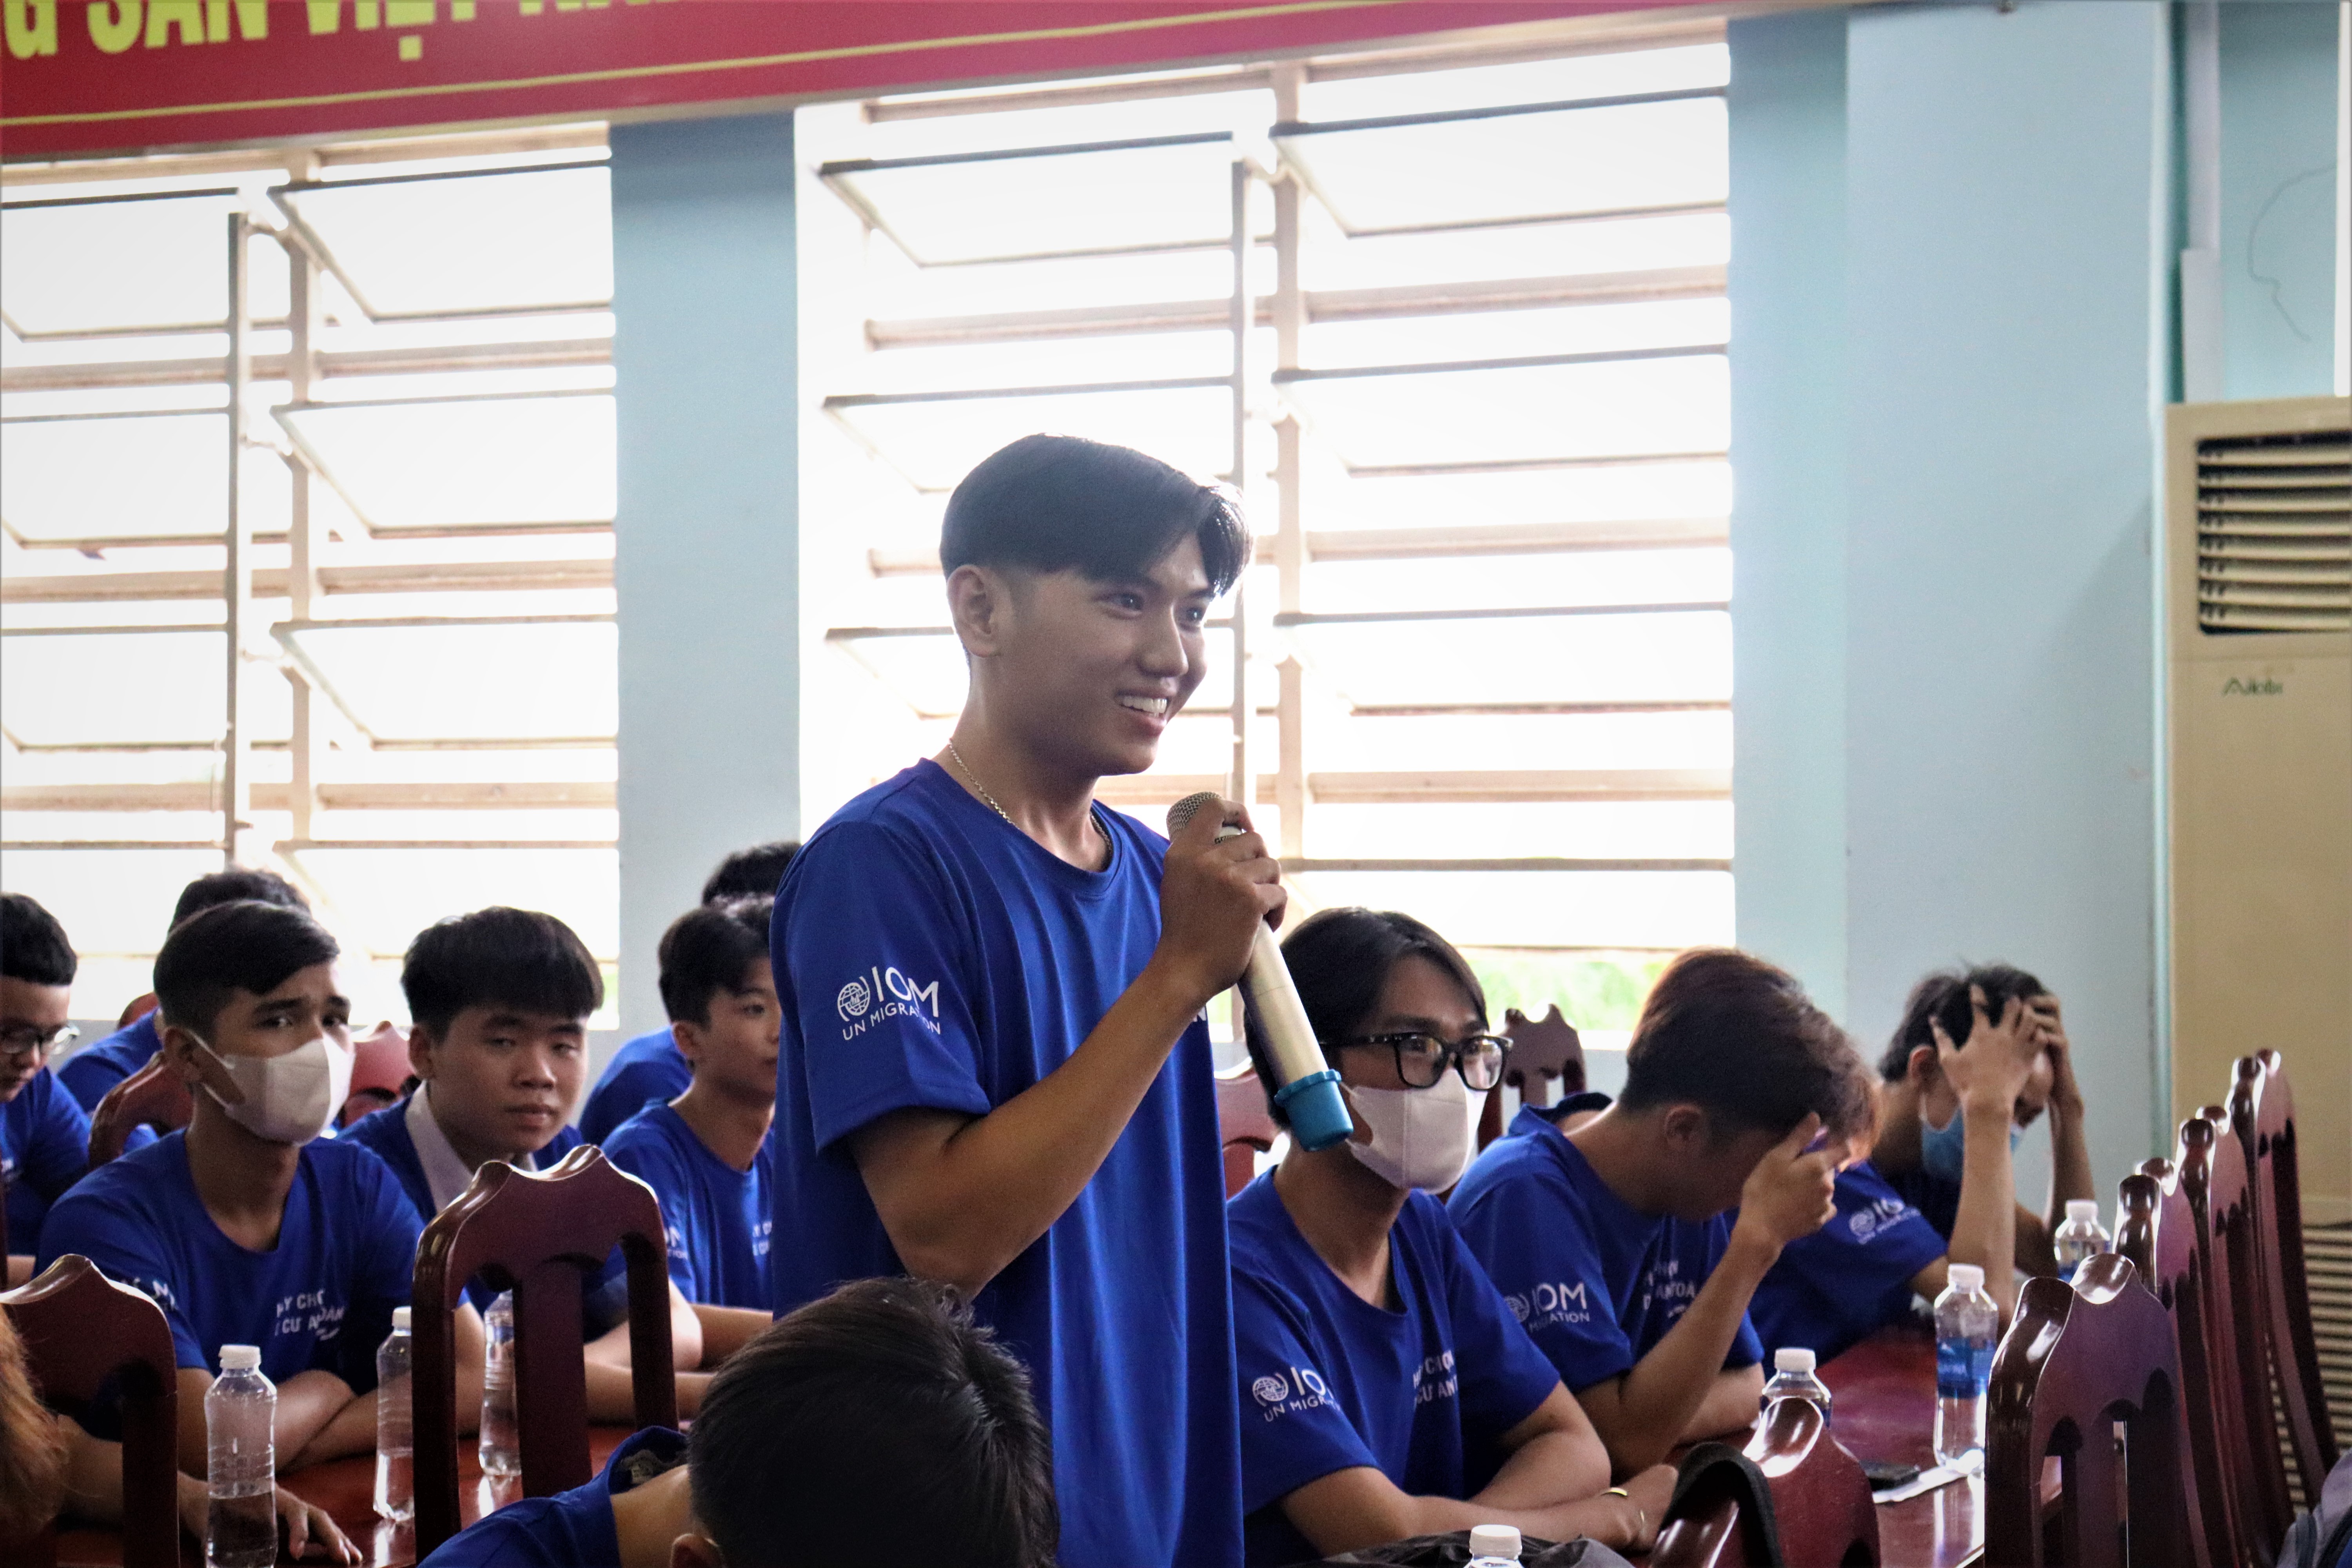 Vocational college students in Can Tho participating in a policy dialogue organized by IOM Viet Nam and the Provincial Women's Union @ Photo: IOM Viet Nam